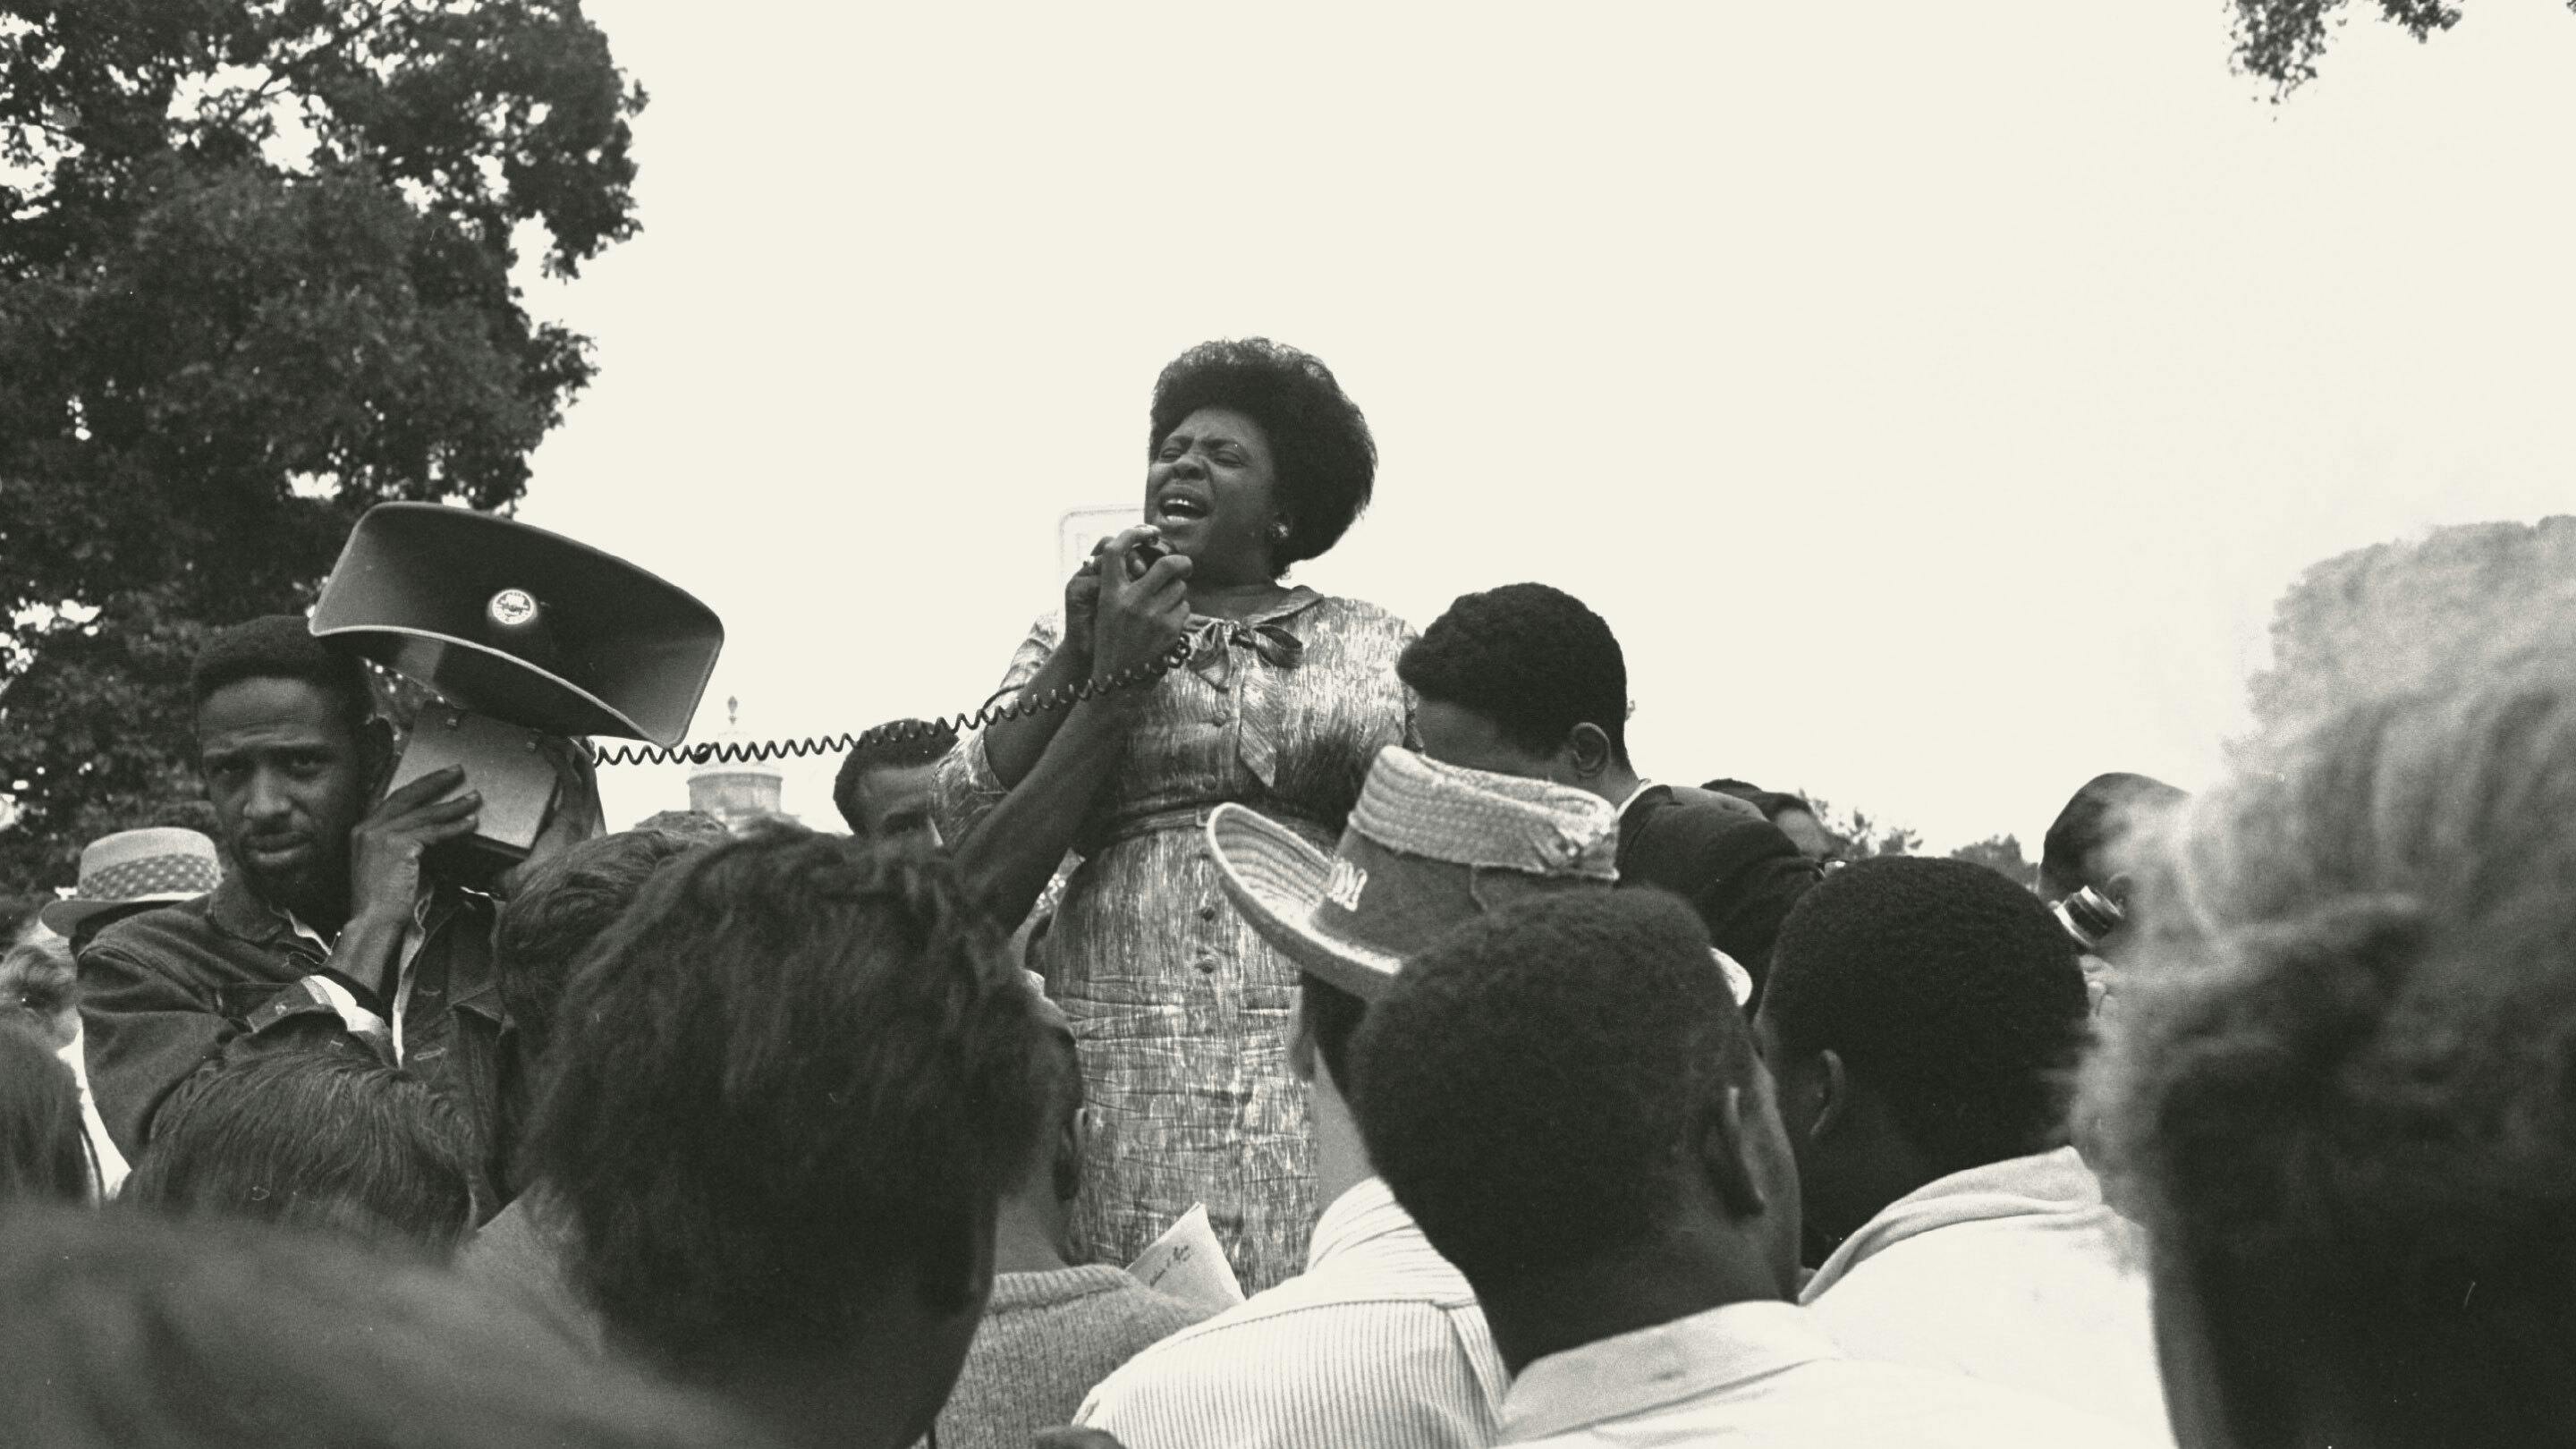 Fannie Lou Hamer speaking into a microphone at an outdoor rally